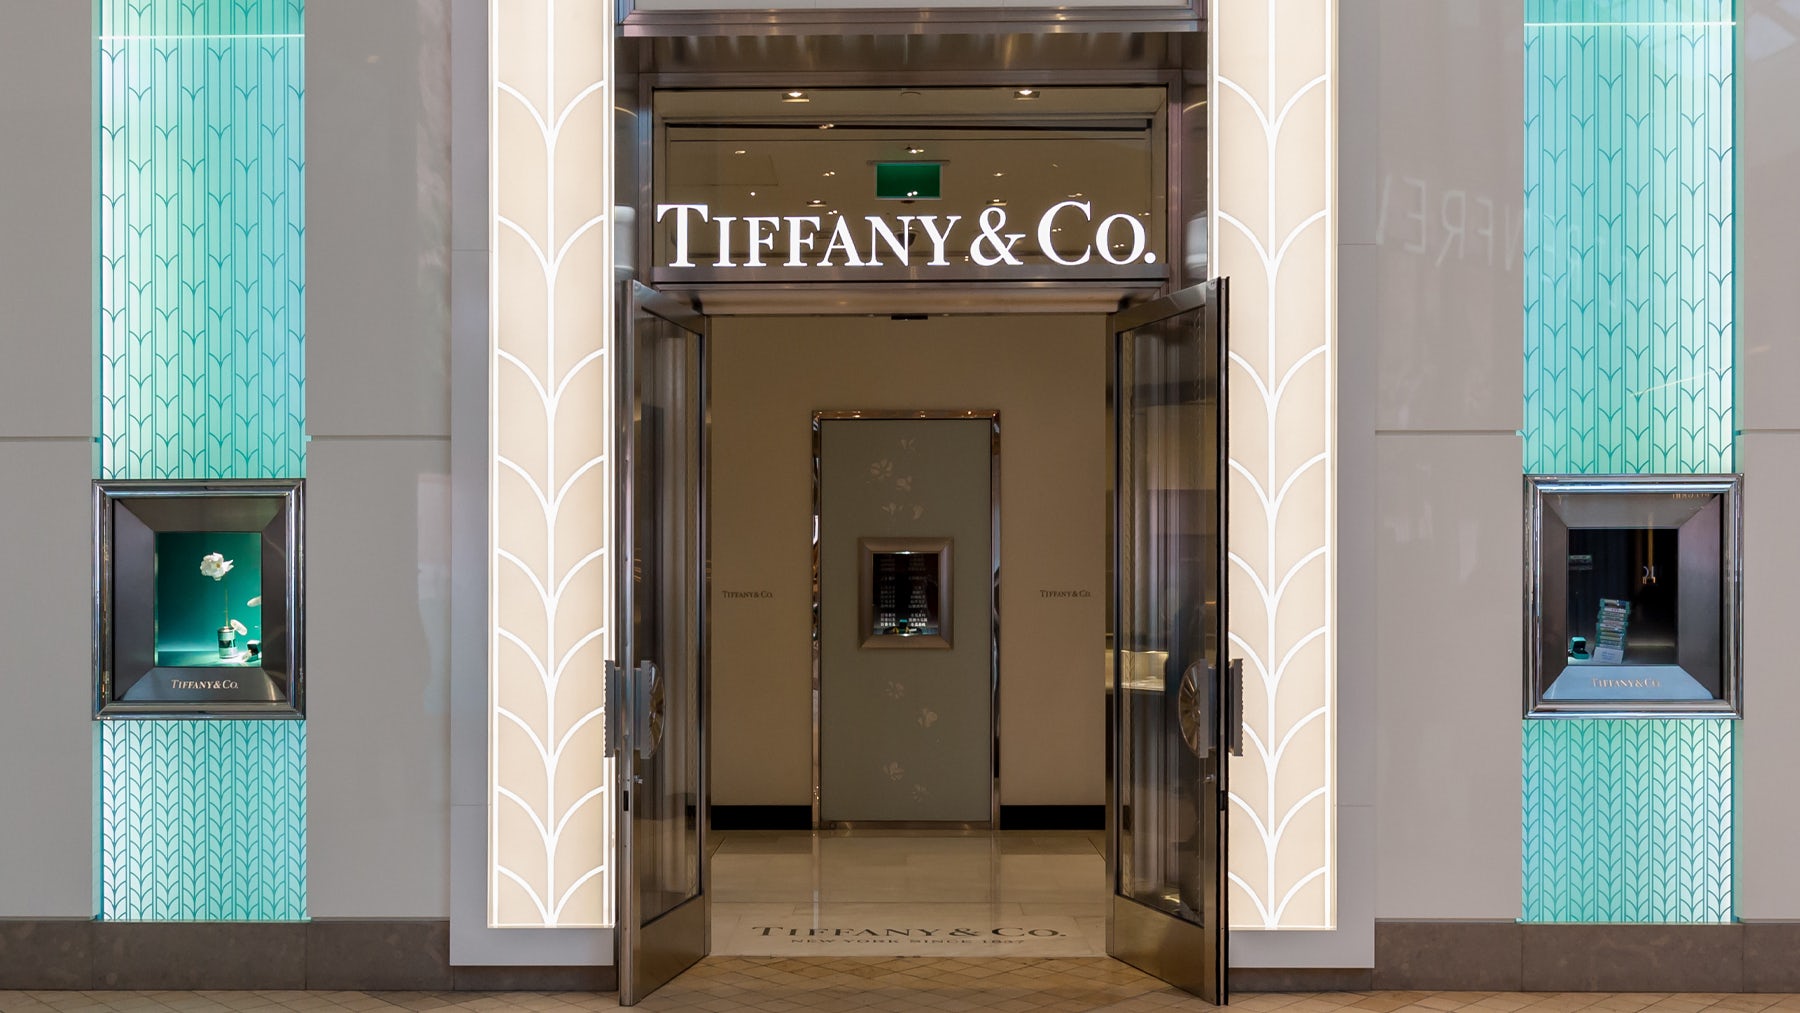 EU Clears Tiffany-LVMH Deal - Competition Policy International